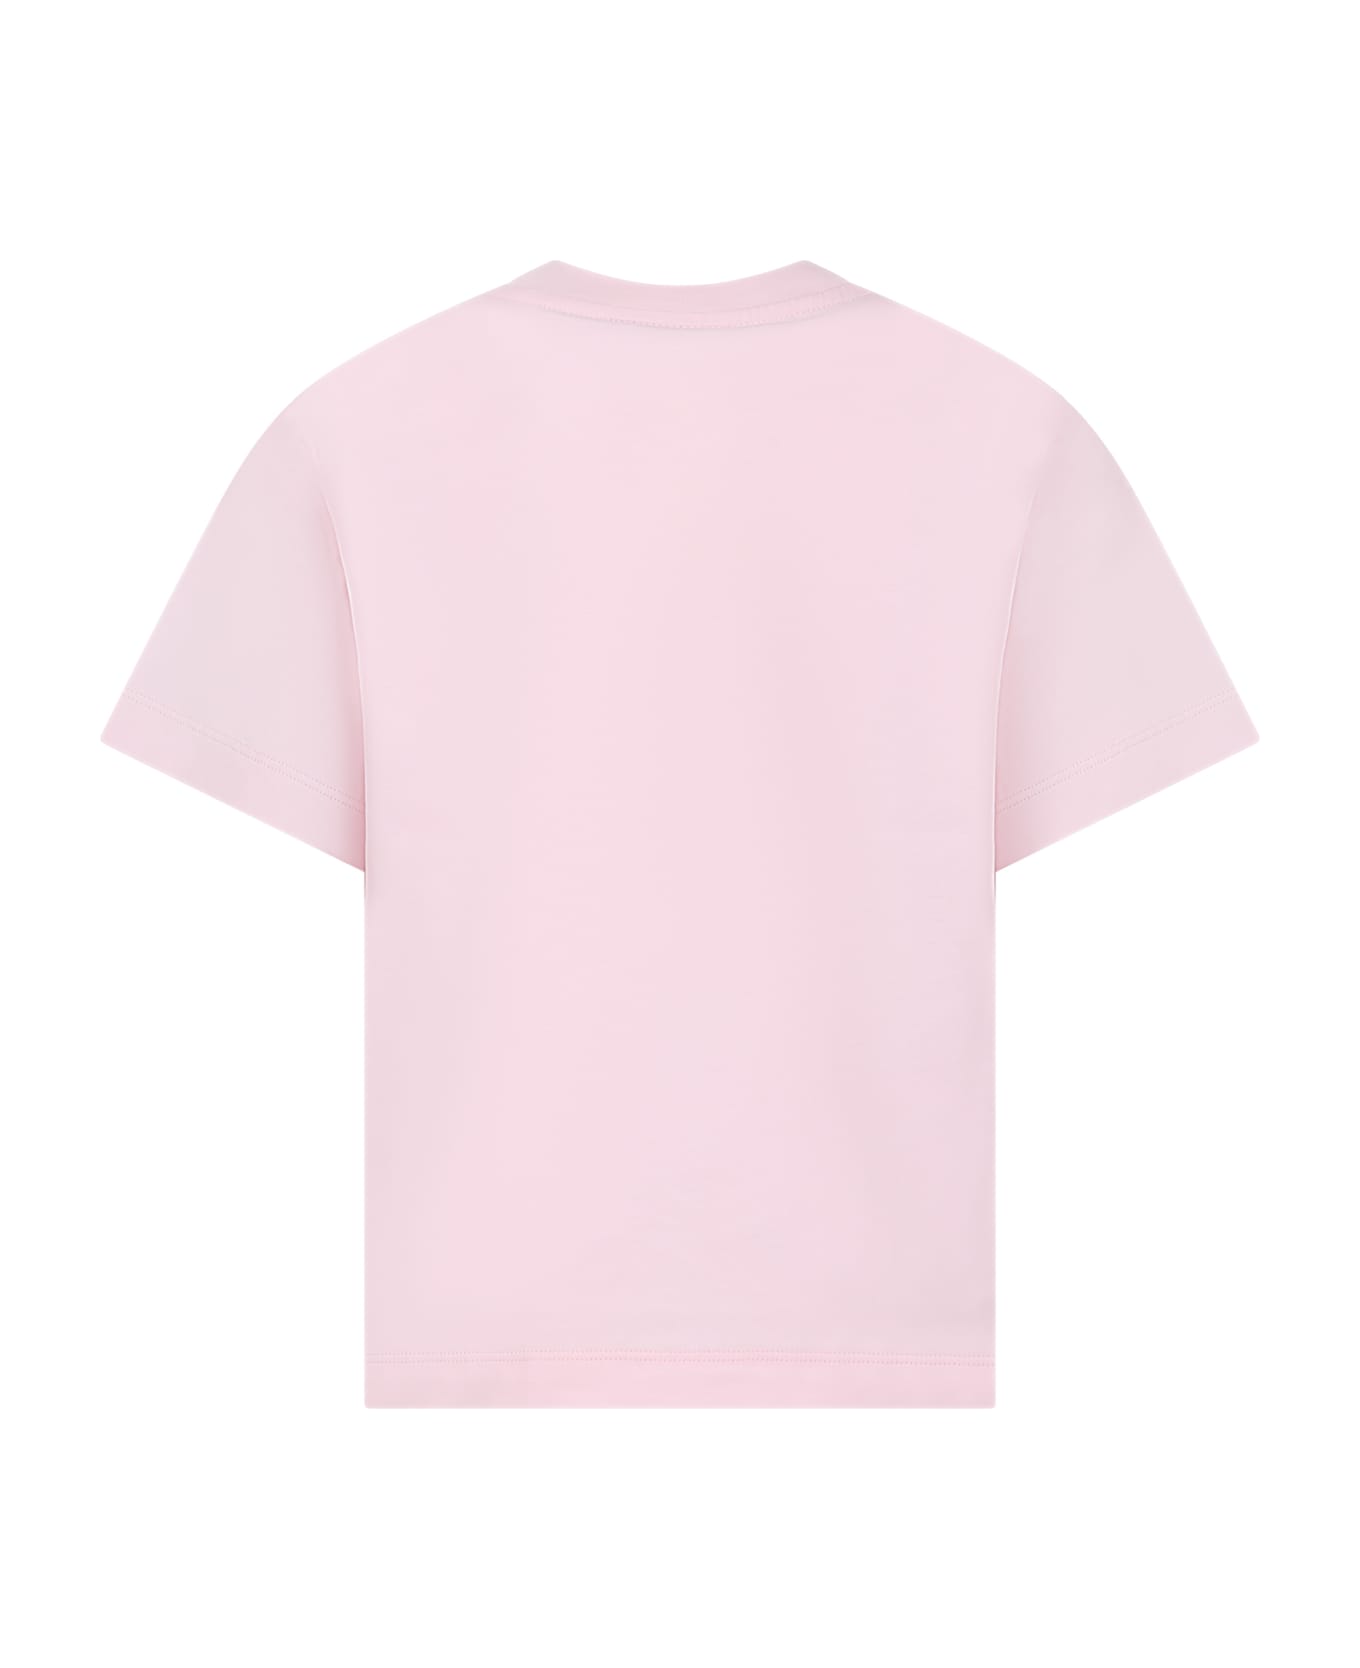 Fendi Pink T-shirt For Kids With Logo - Pink Tシャツ＆ポロシャツ